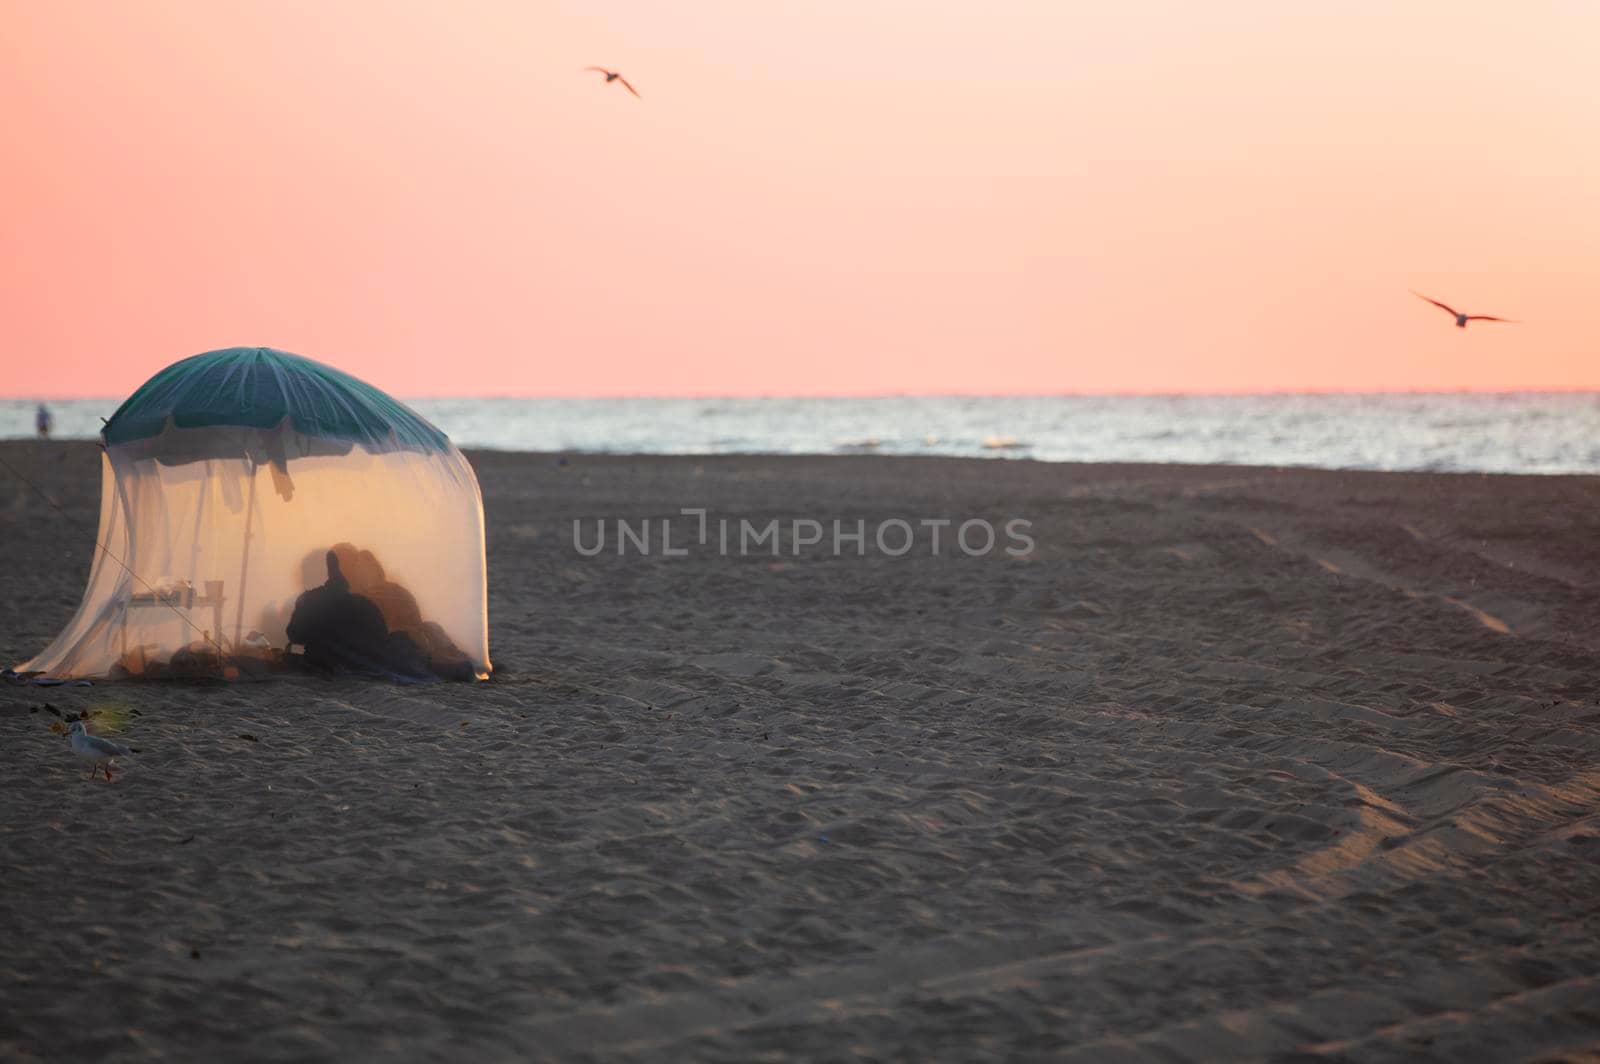 Relax on the beach in a tent. The coast and the silhouettes of people in the tent. by Sviatlana